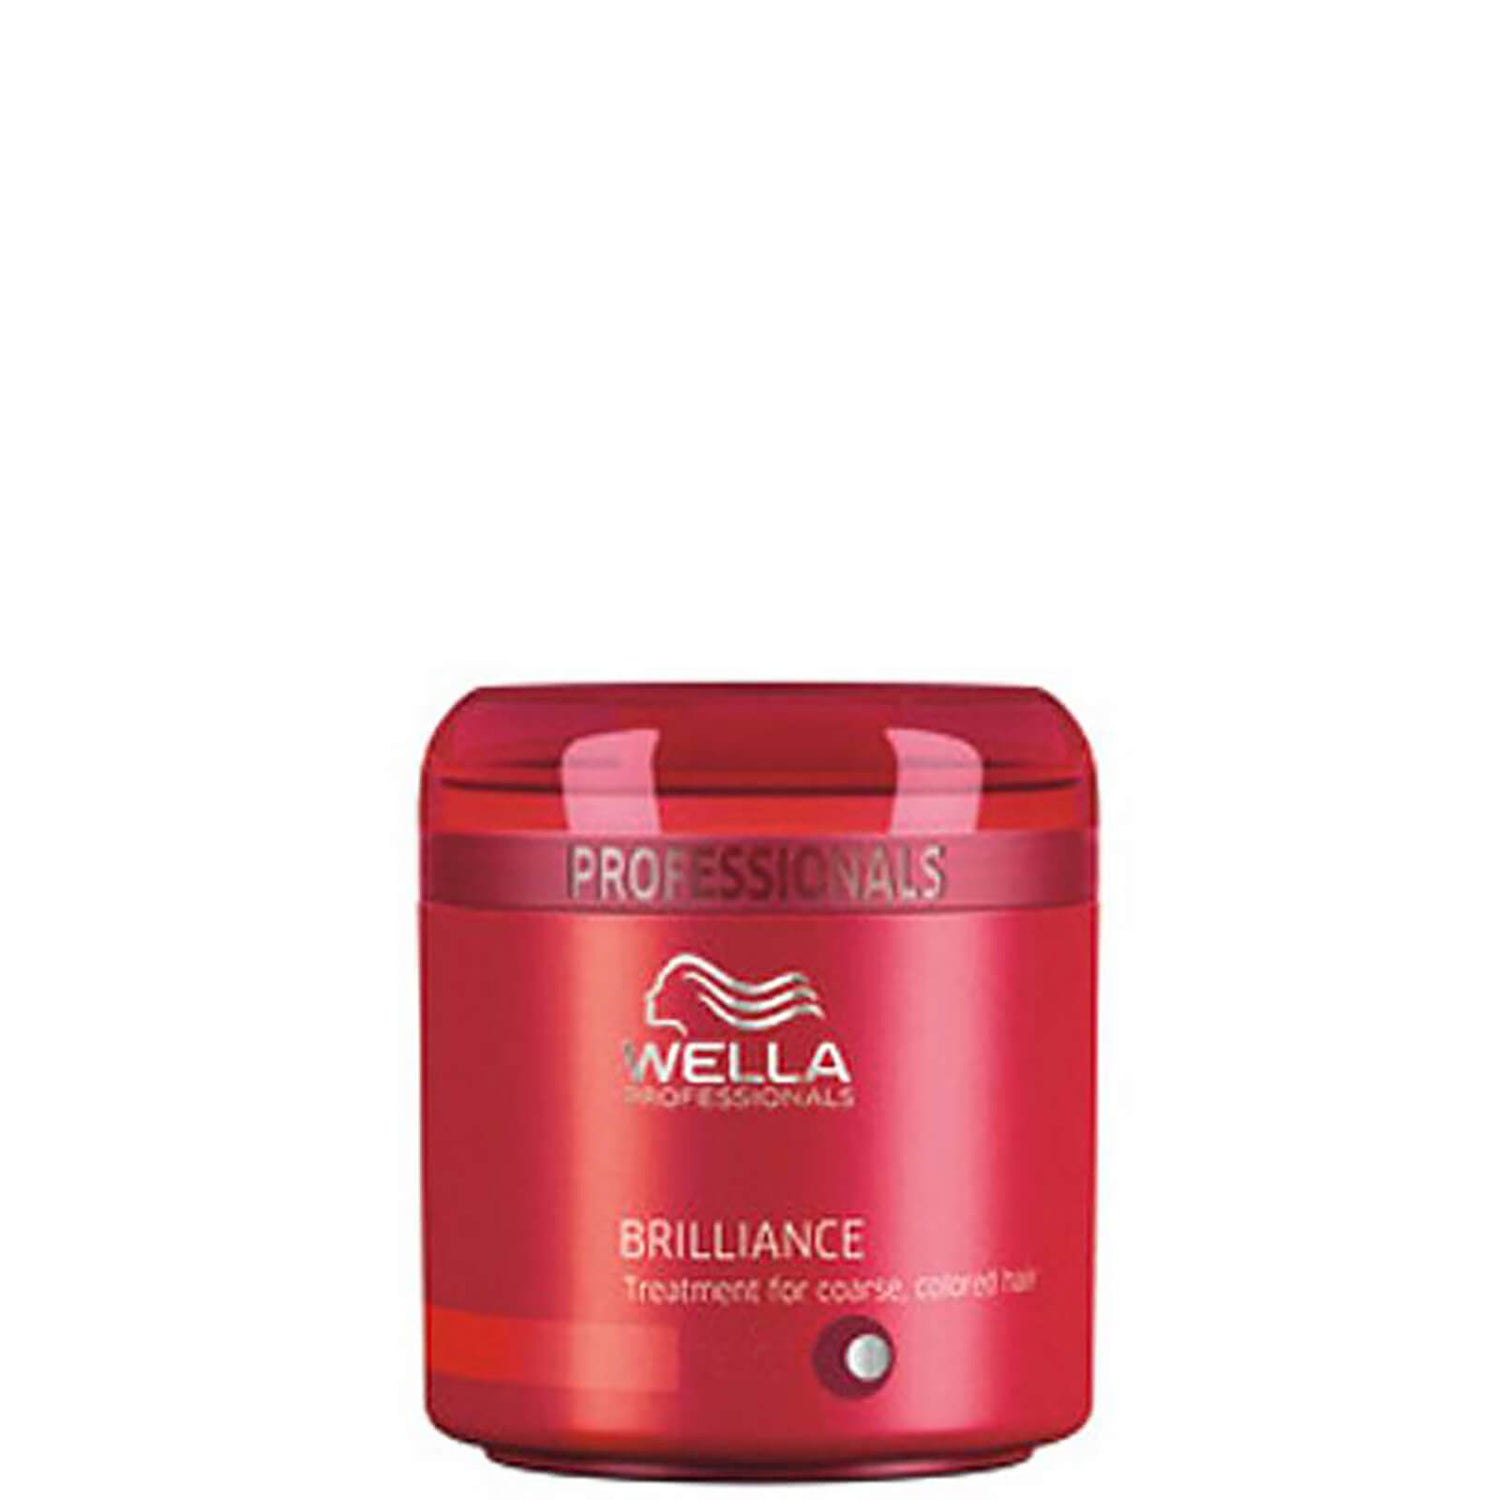 WELLA PROFESSIONALS BRILLIANCE TREATMENT FOR FINE TO NORMAL, COLOURED HAIR (150ML)